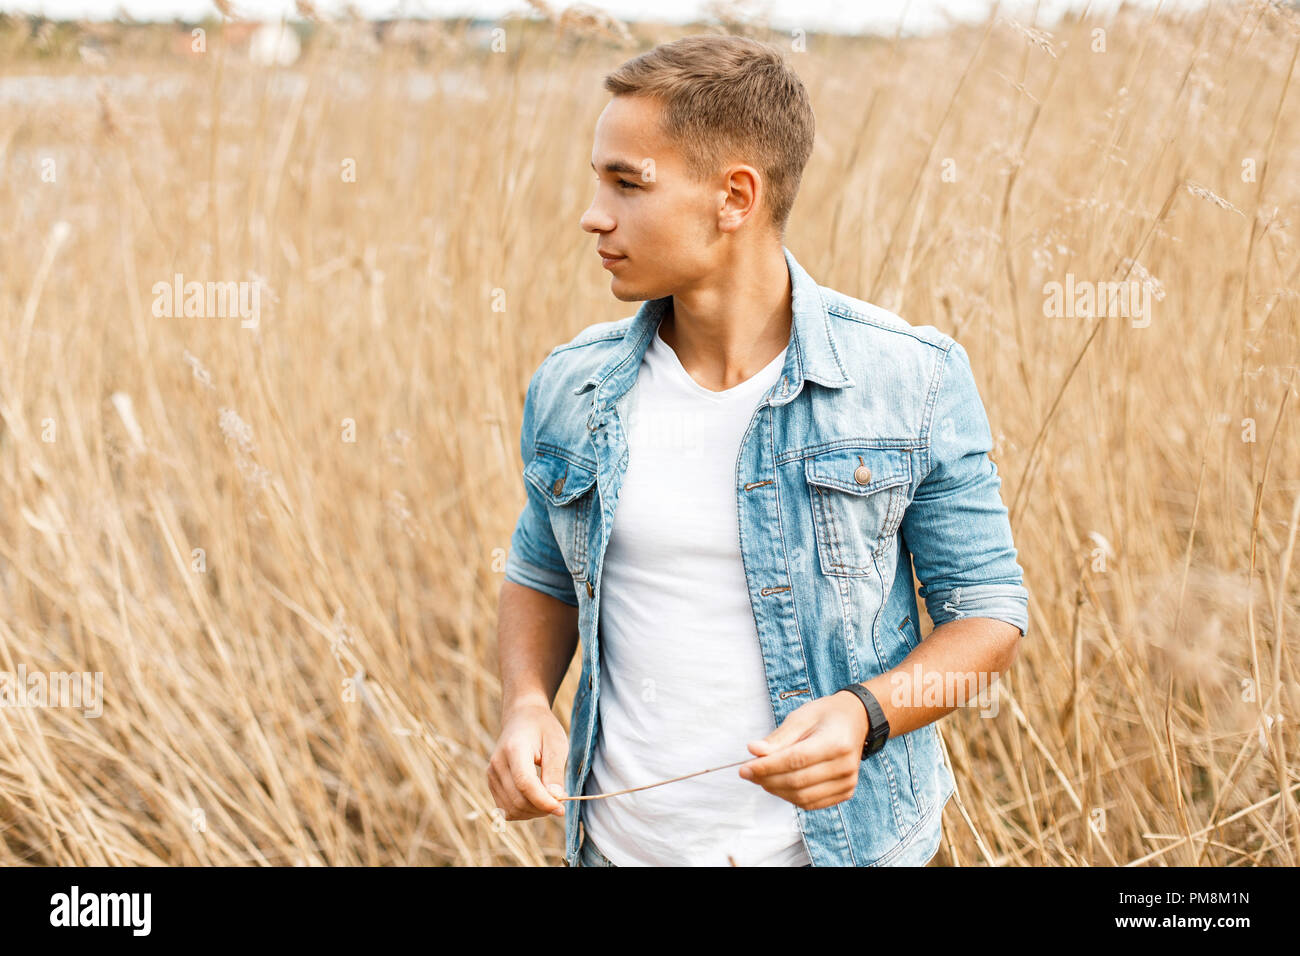 Handsome young guy in jeans clothes and a white T-shirt is walking outdoors in the grass Stock Photo